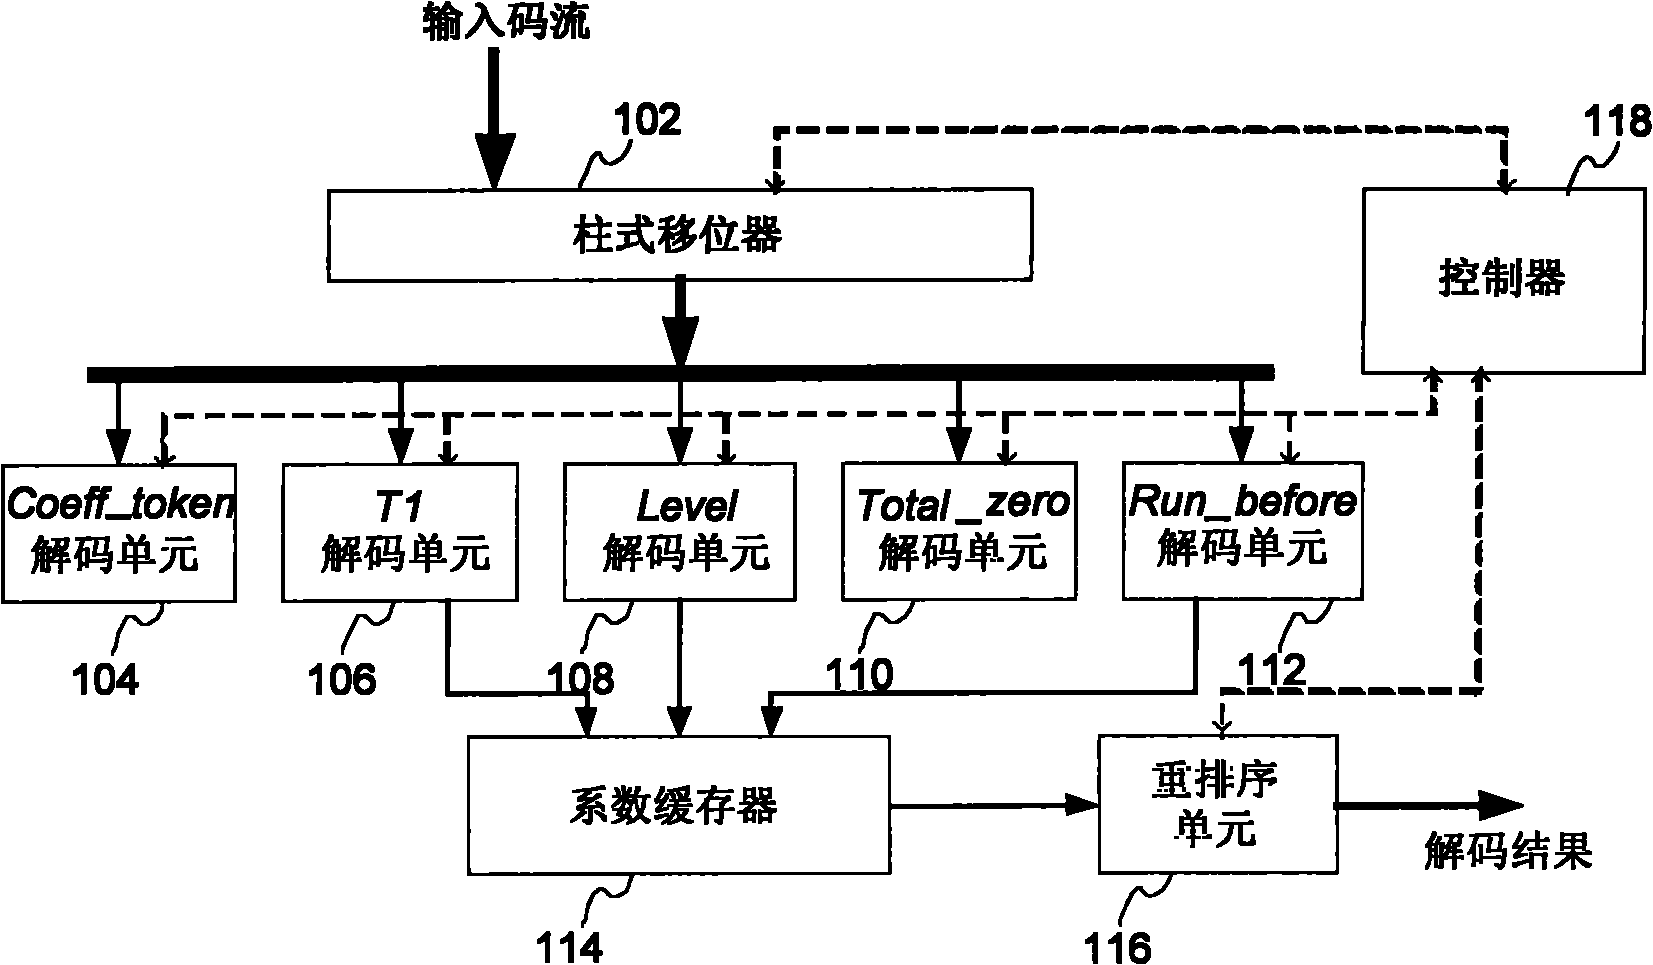 CAVLC decoding method and system